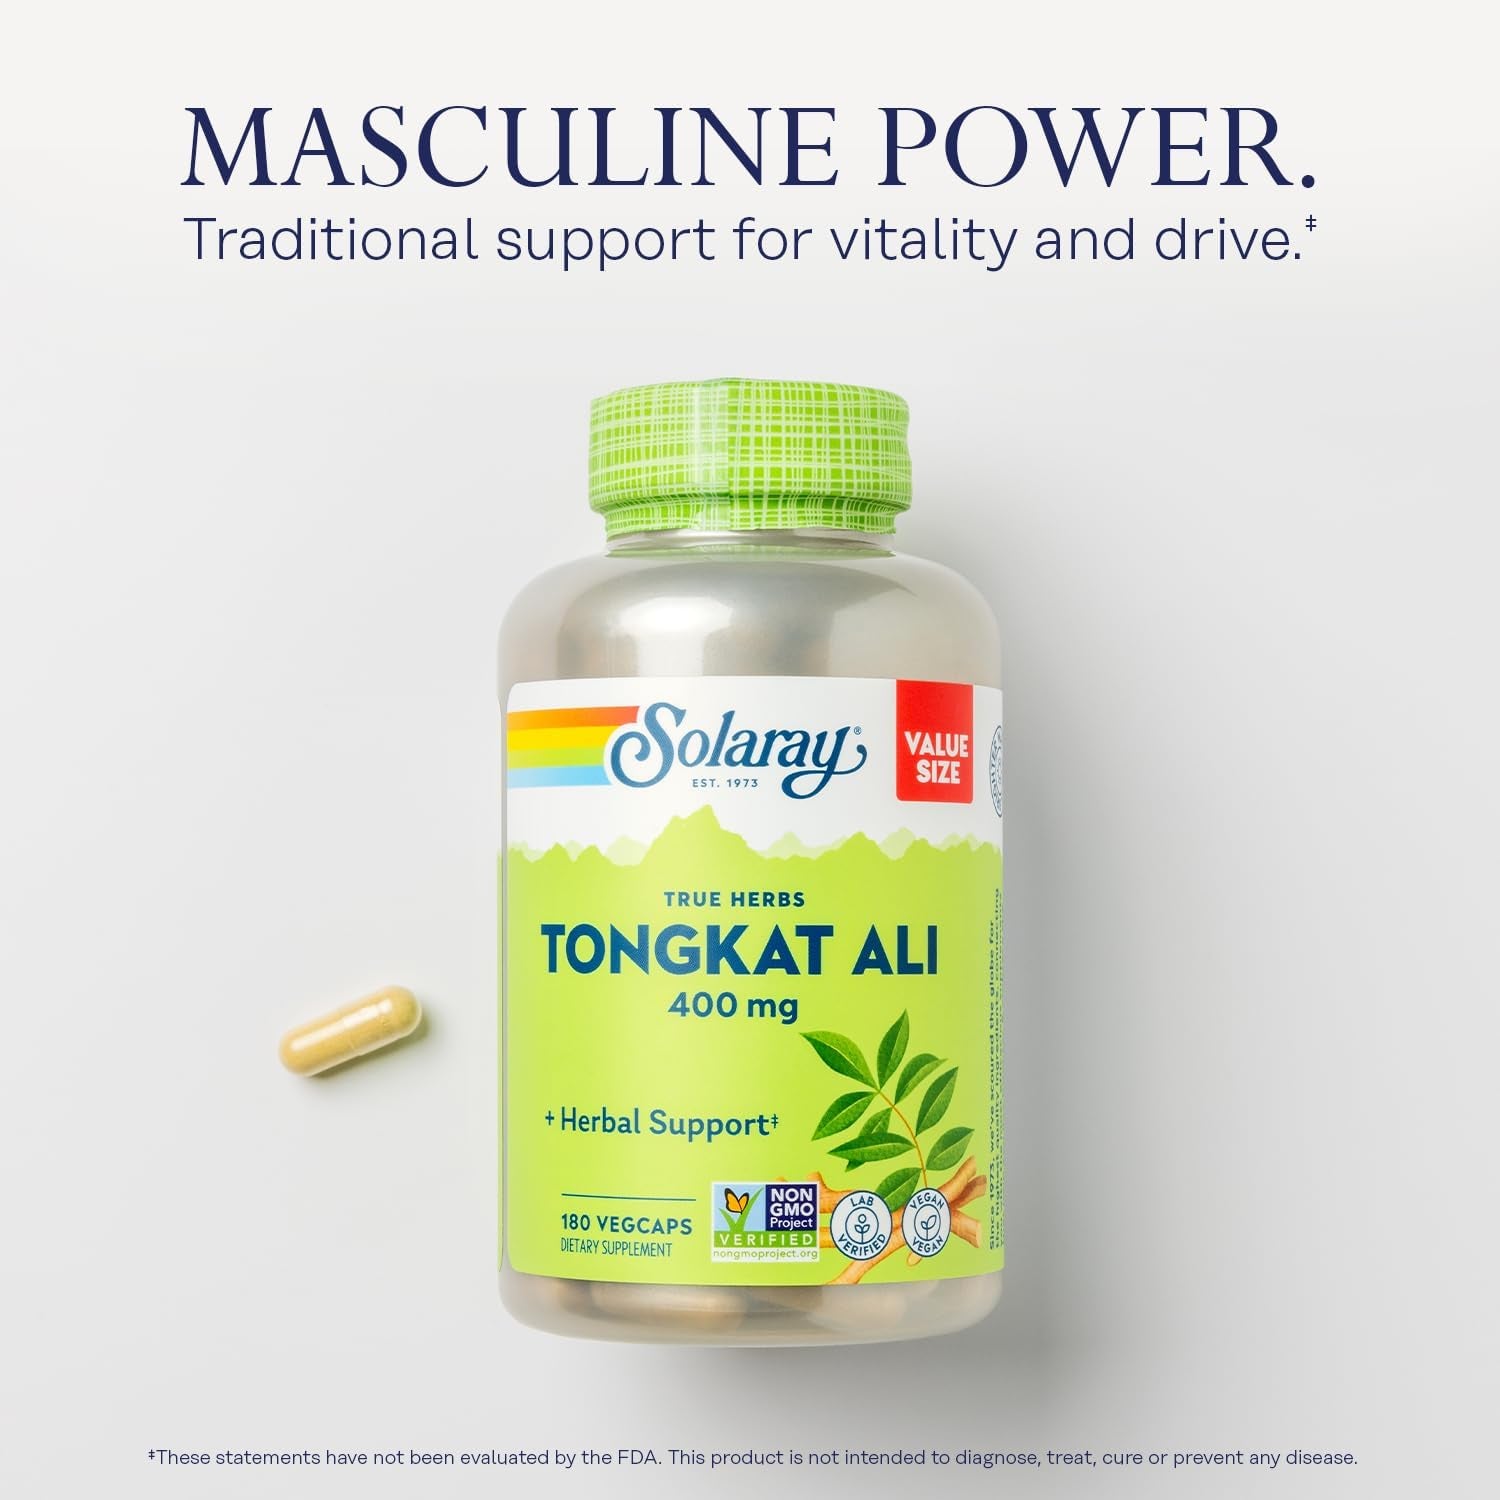 SOLARAY Tongkat Ali 400 Mg, Longjack Tongkat Ali Supplement for Men, Increase Performance, Support Lean Muscle Growth, Natural Energy, Stamina & Recovery, 180 Capsules